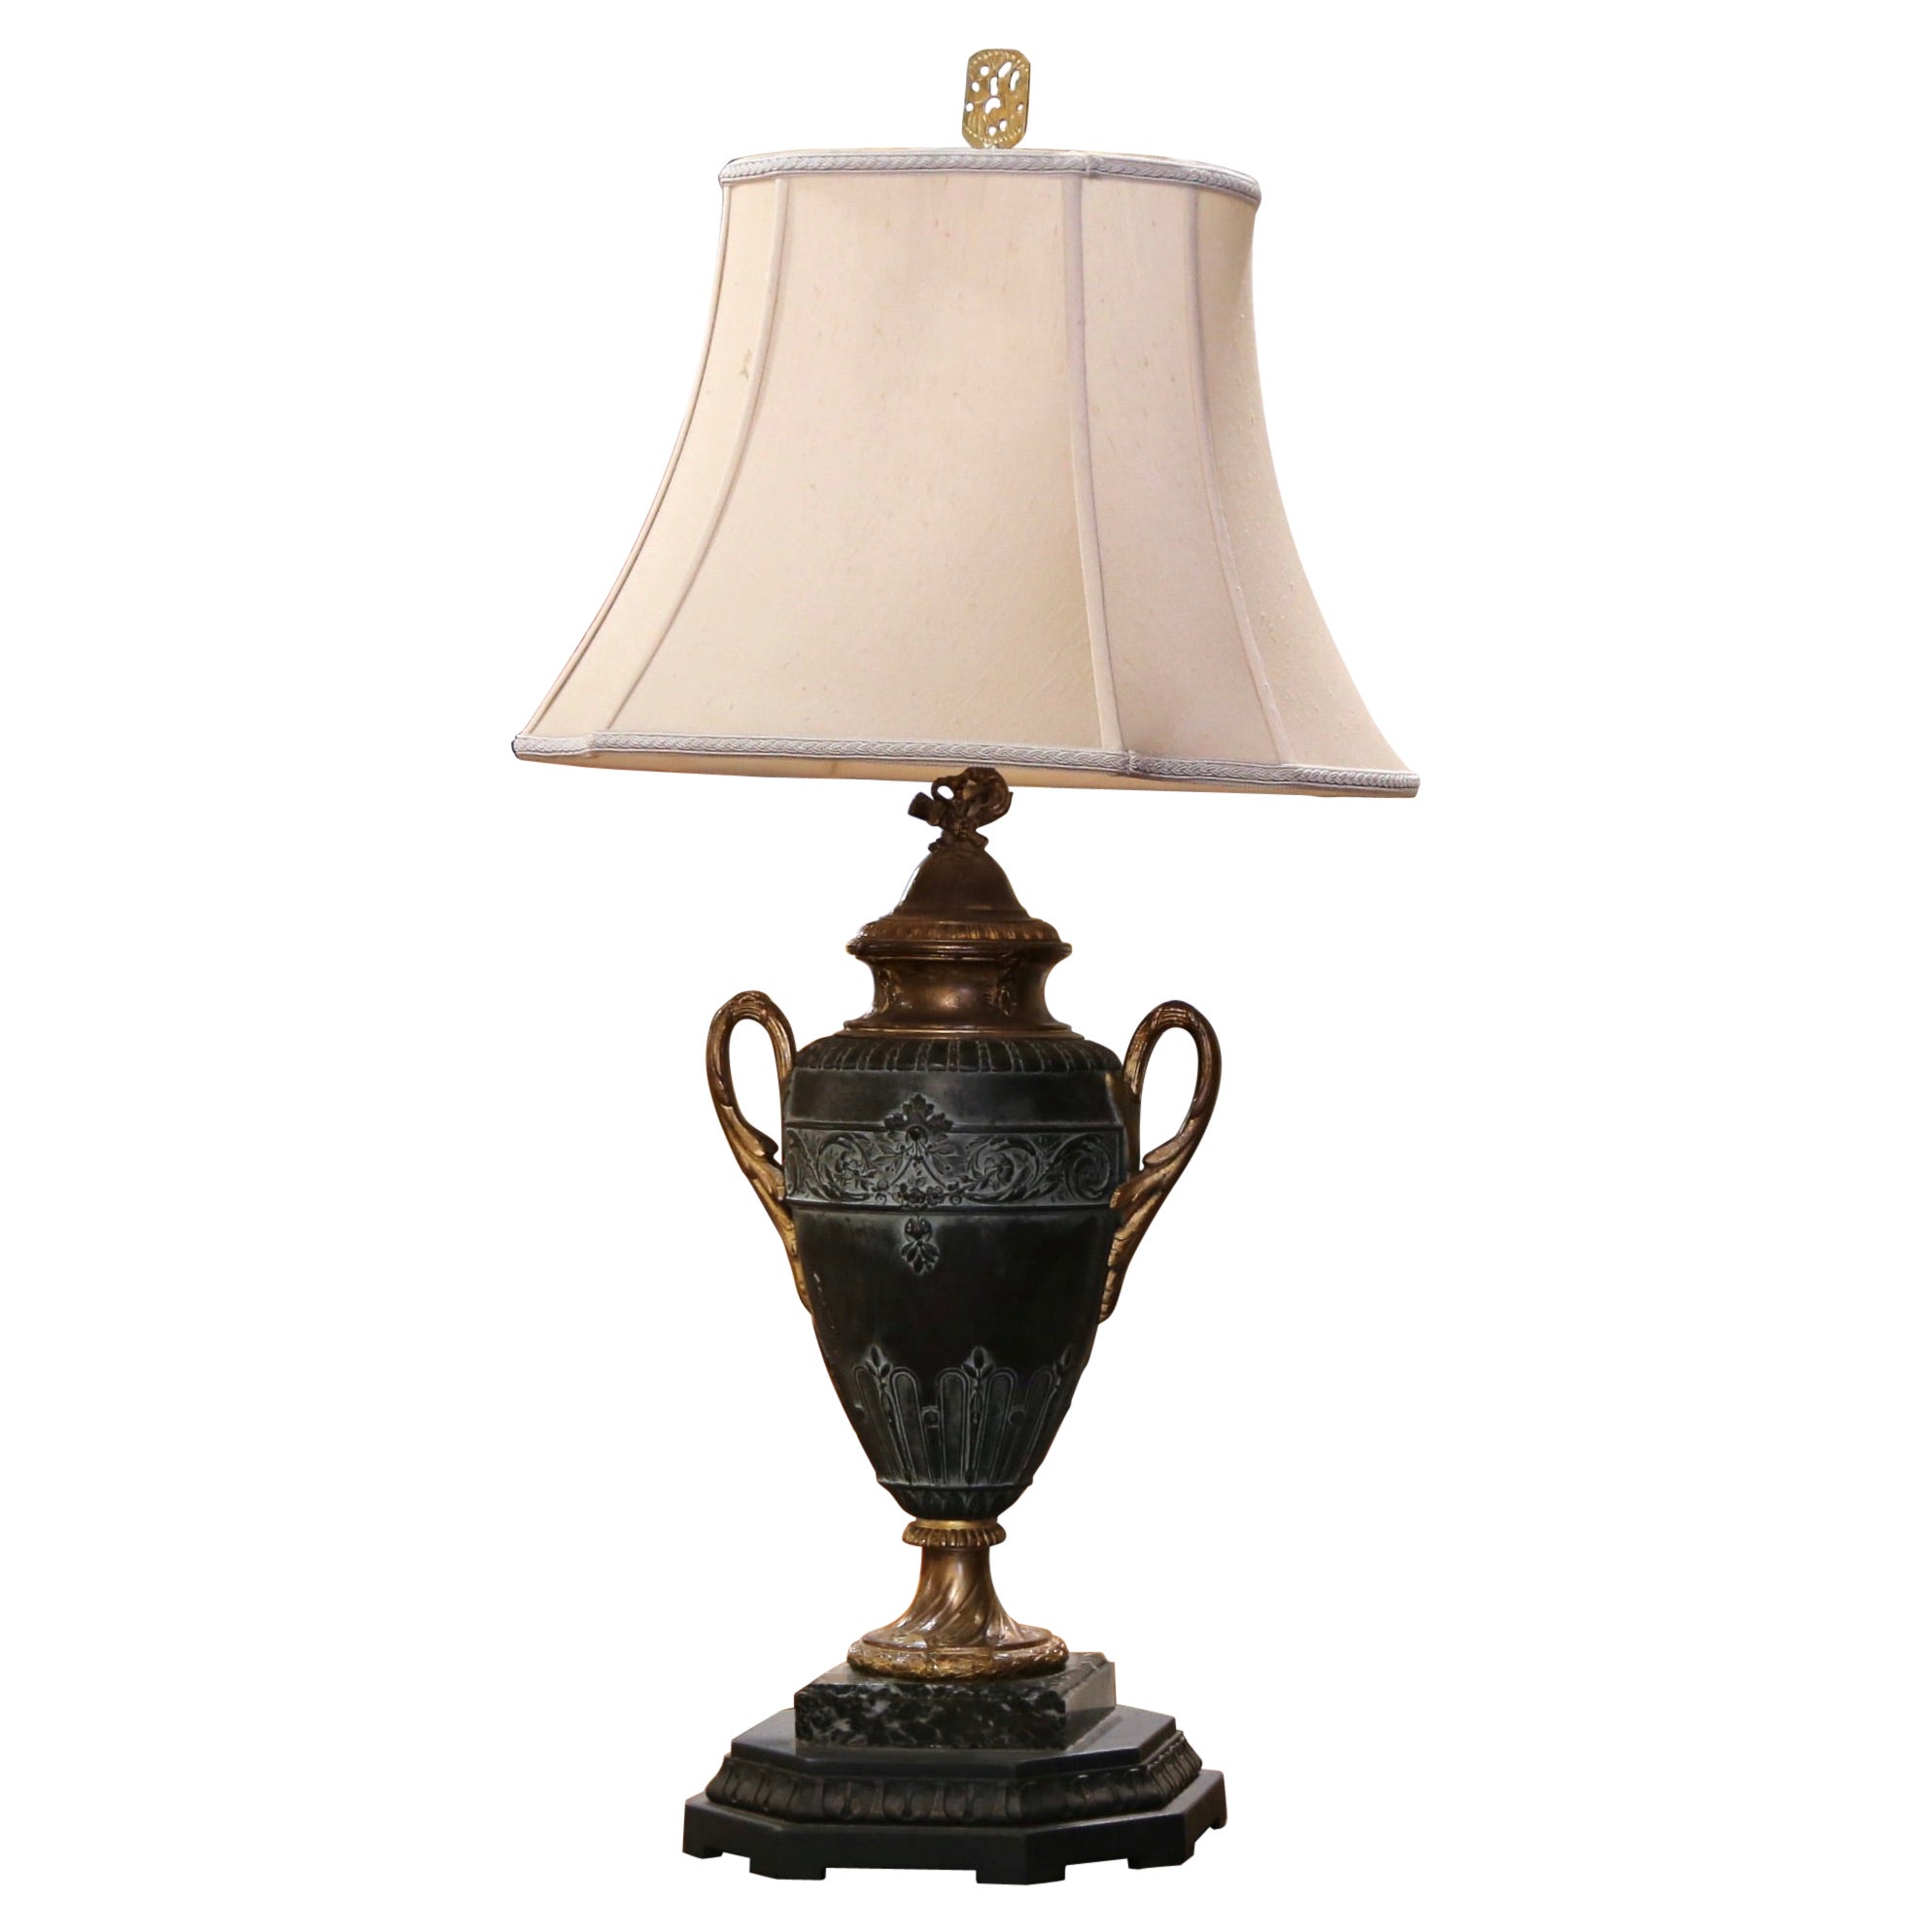 19th Century French Spelter Urn-Form on Marble Base Table Lamp For Sale